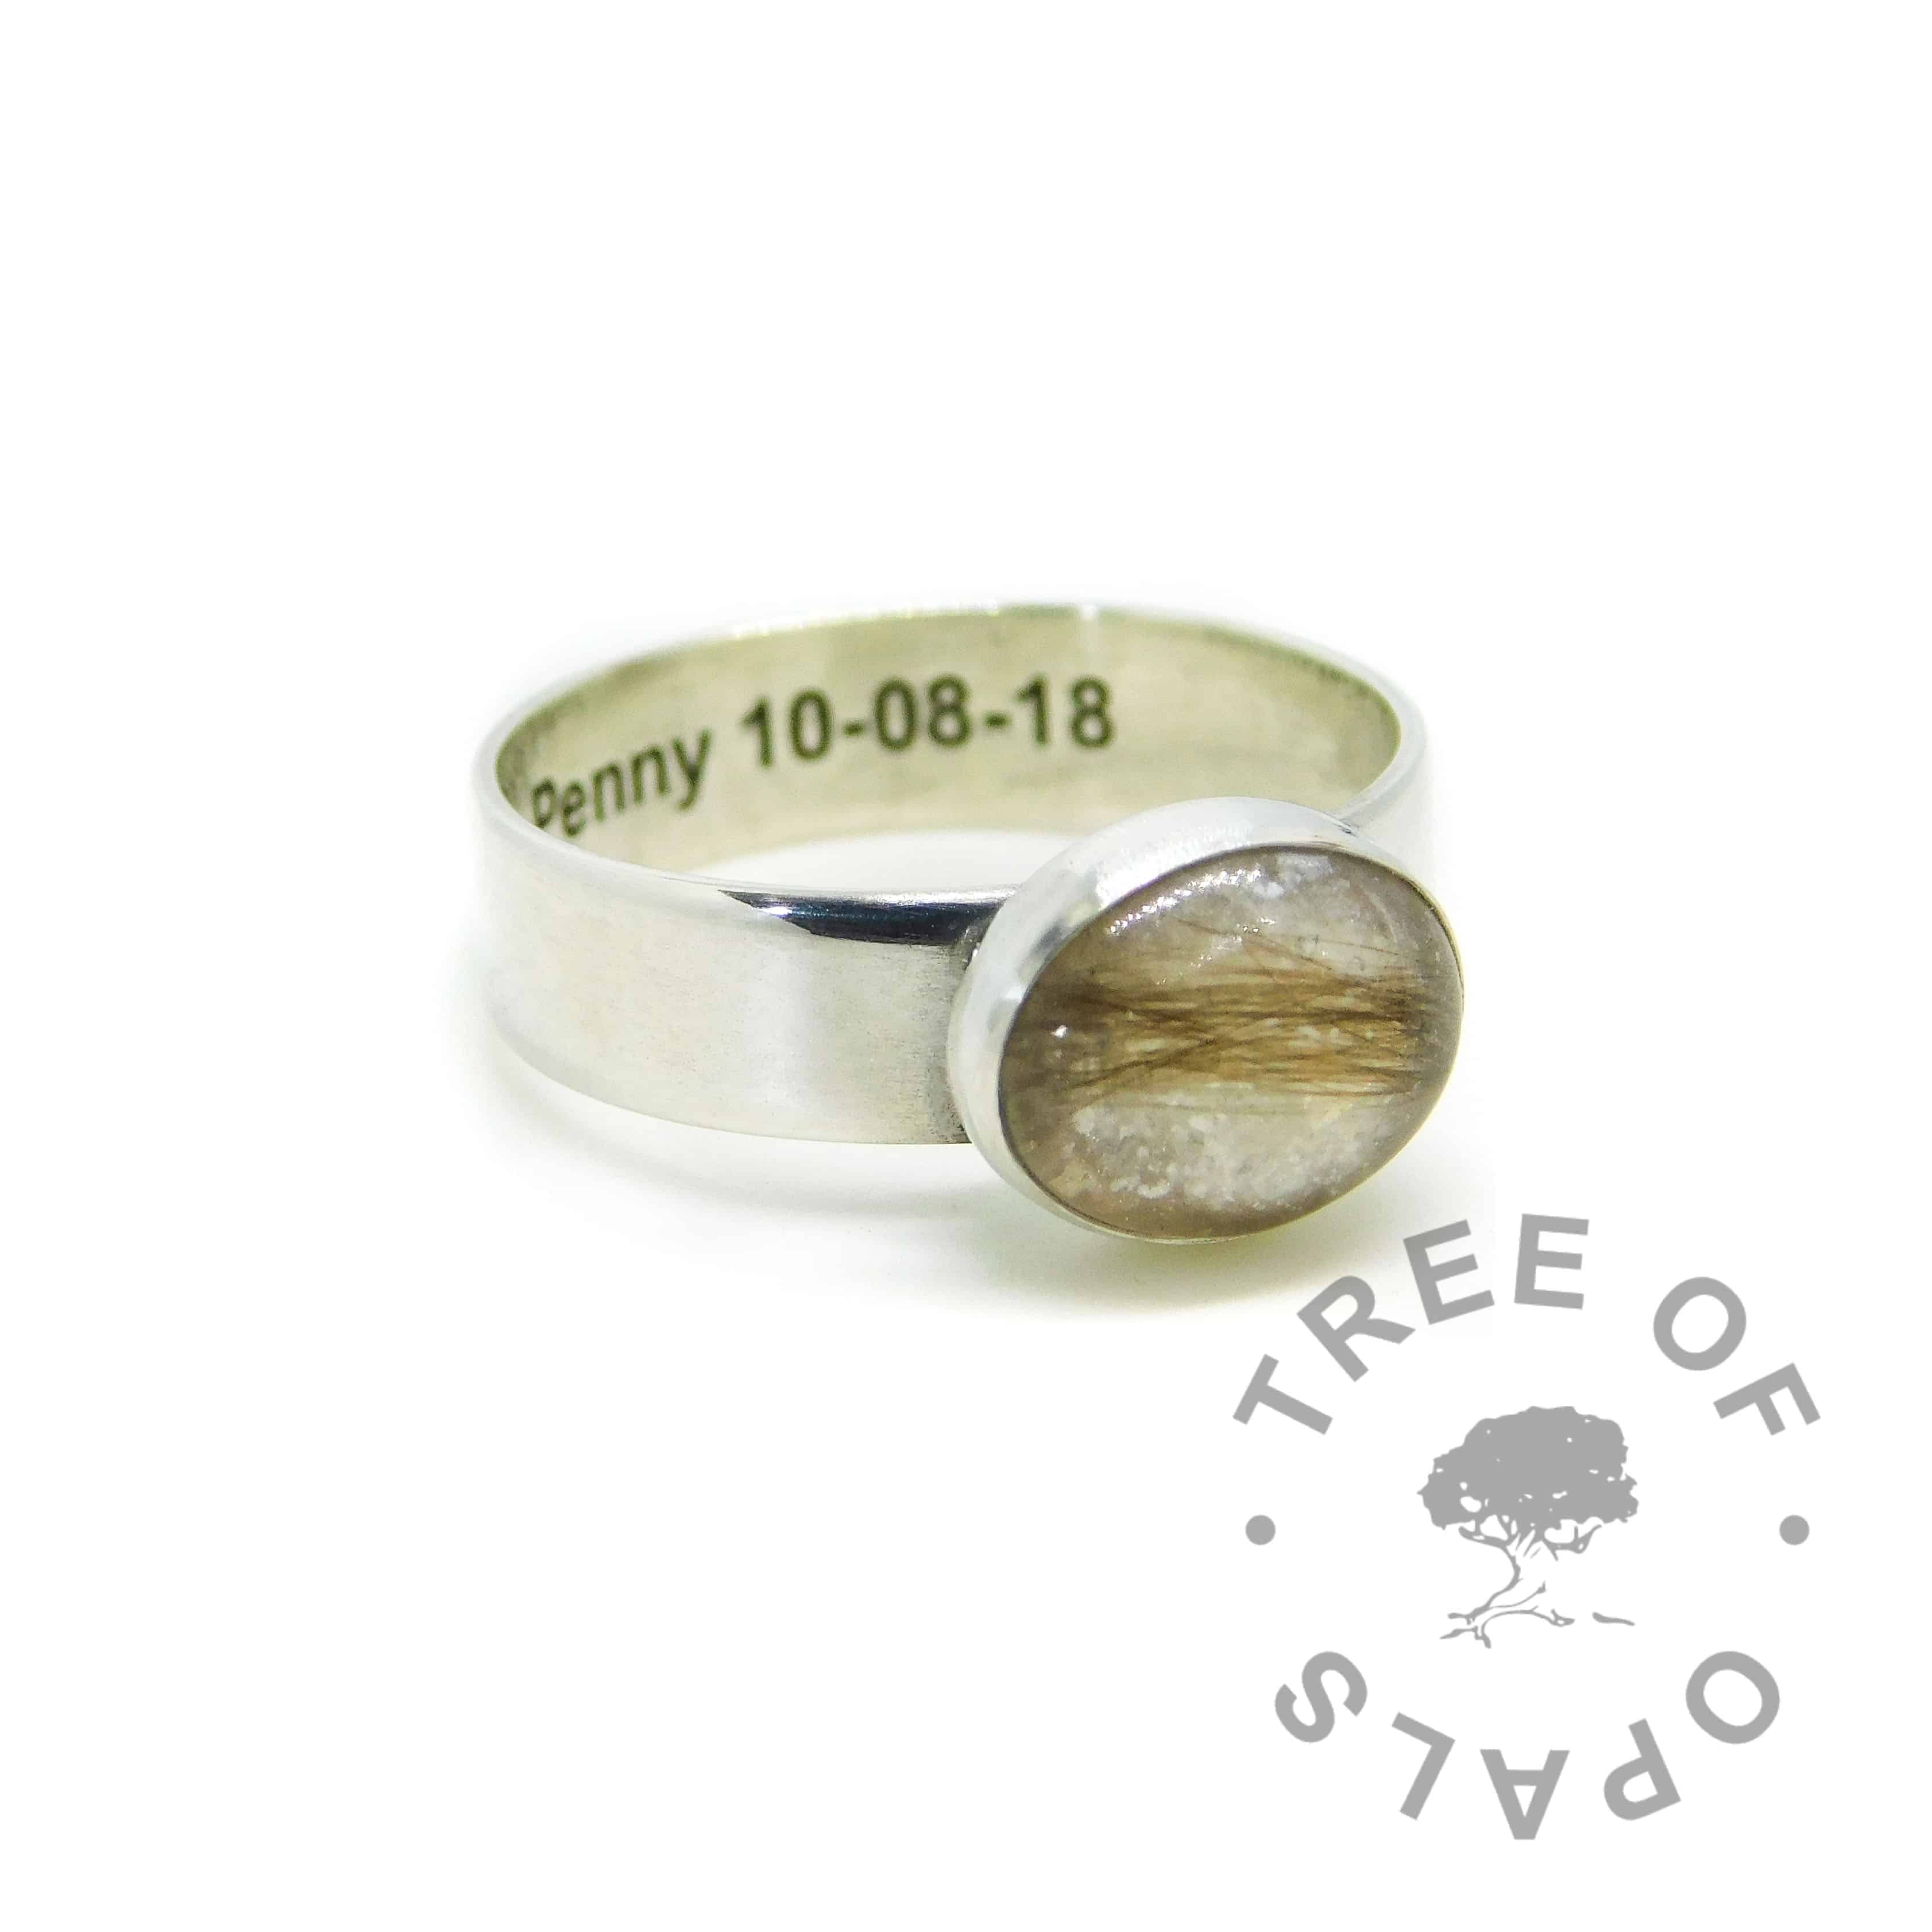 Engraved 6mm lock of hair ring with unicorn white sparkle mix and subtle August birthstone peridot. Engraved inside in Arial font. Handmade solid sterling silver memorial ring